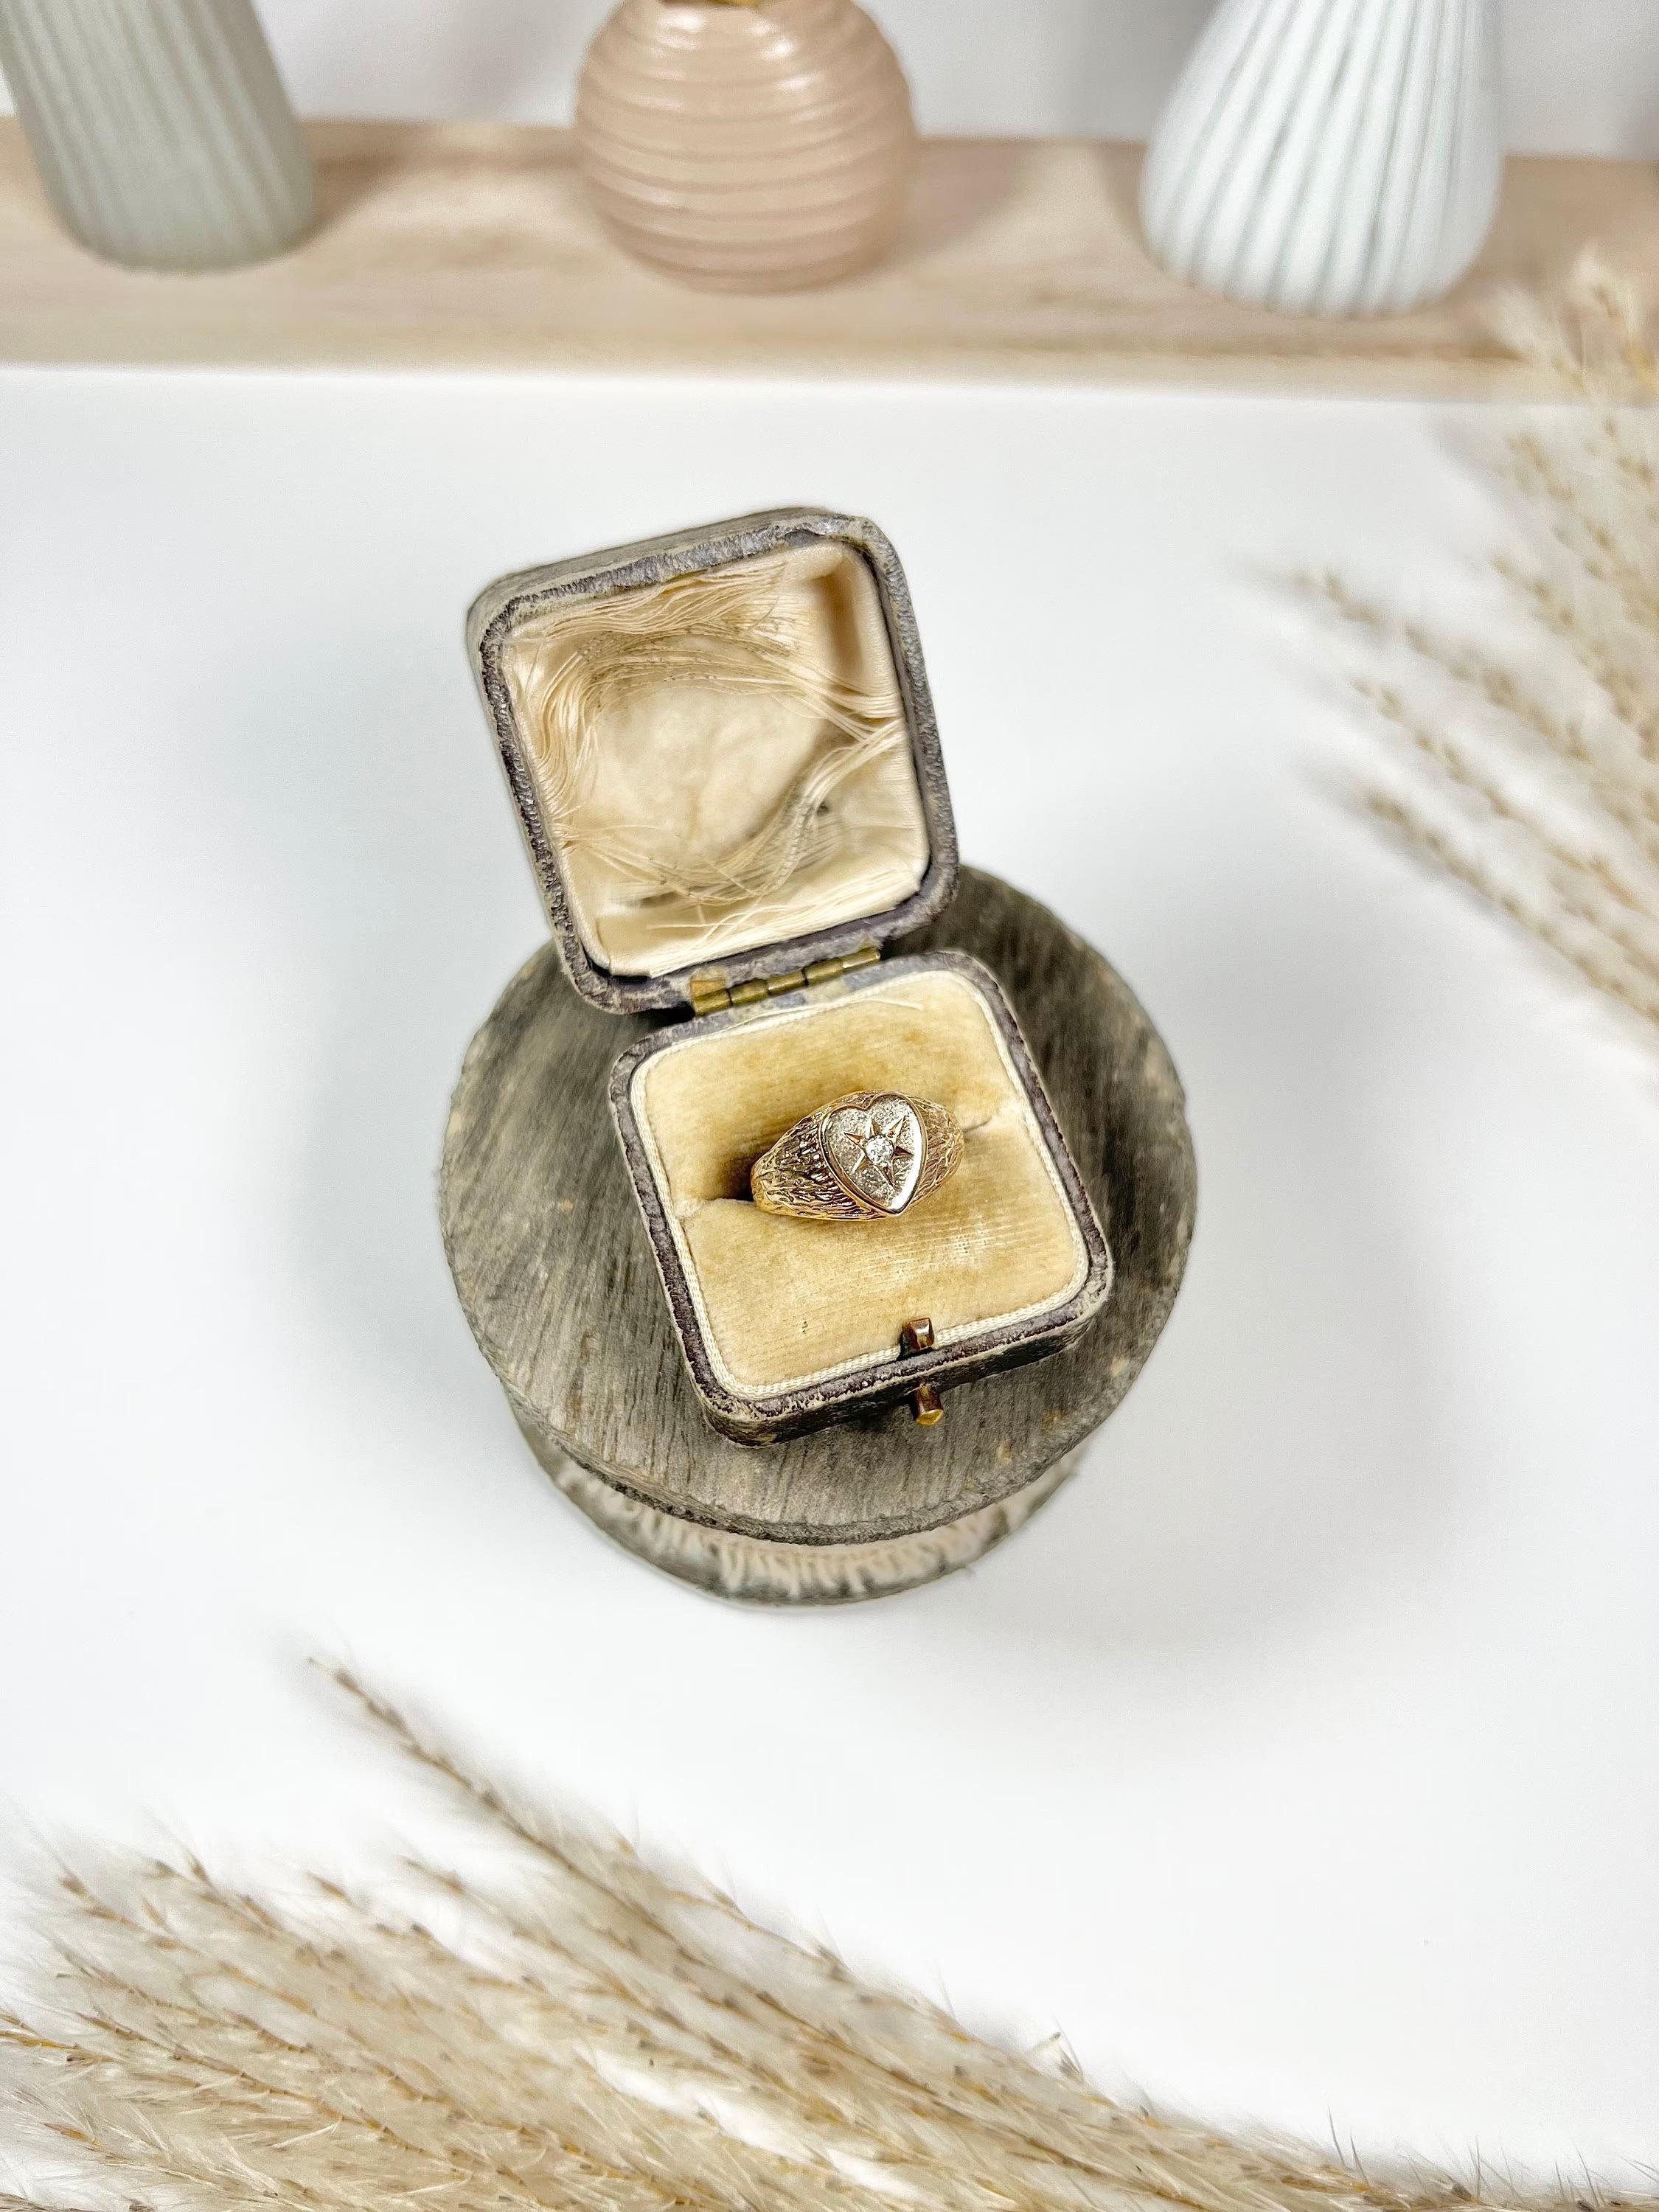 Vintage Signet Ring 

9ct Gold 

Hallmarked Birmingham- No Date Letter

Makers Mark A & P

Circa 1960’s

Lovely, vintage signet ring. Heart shaped with a single, star-set diamond. Mounted in lovely yellow gold with bark effect detailing to the